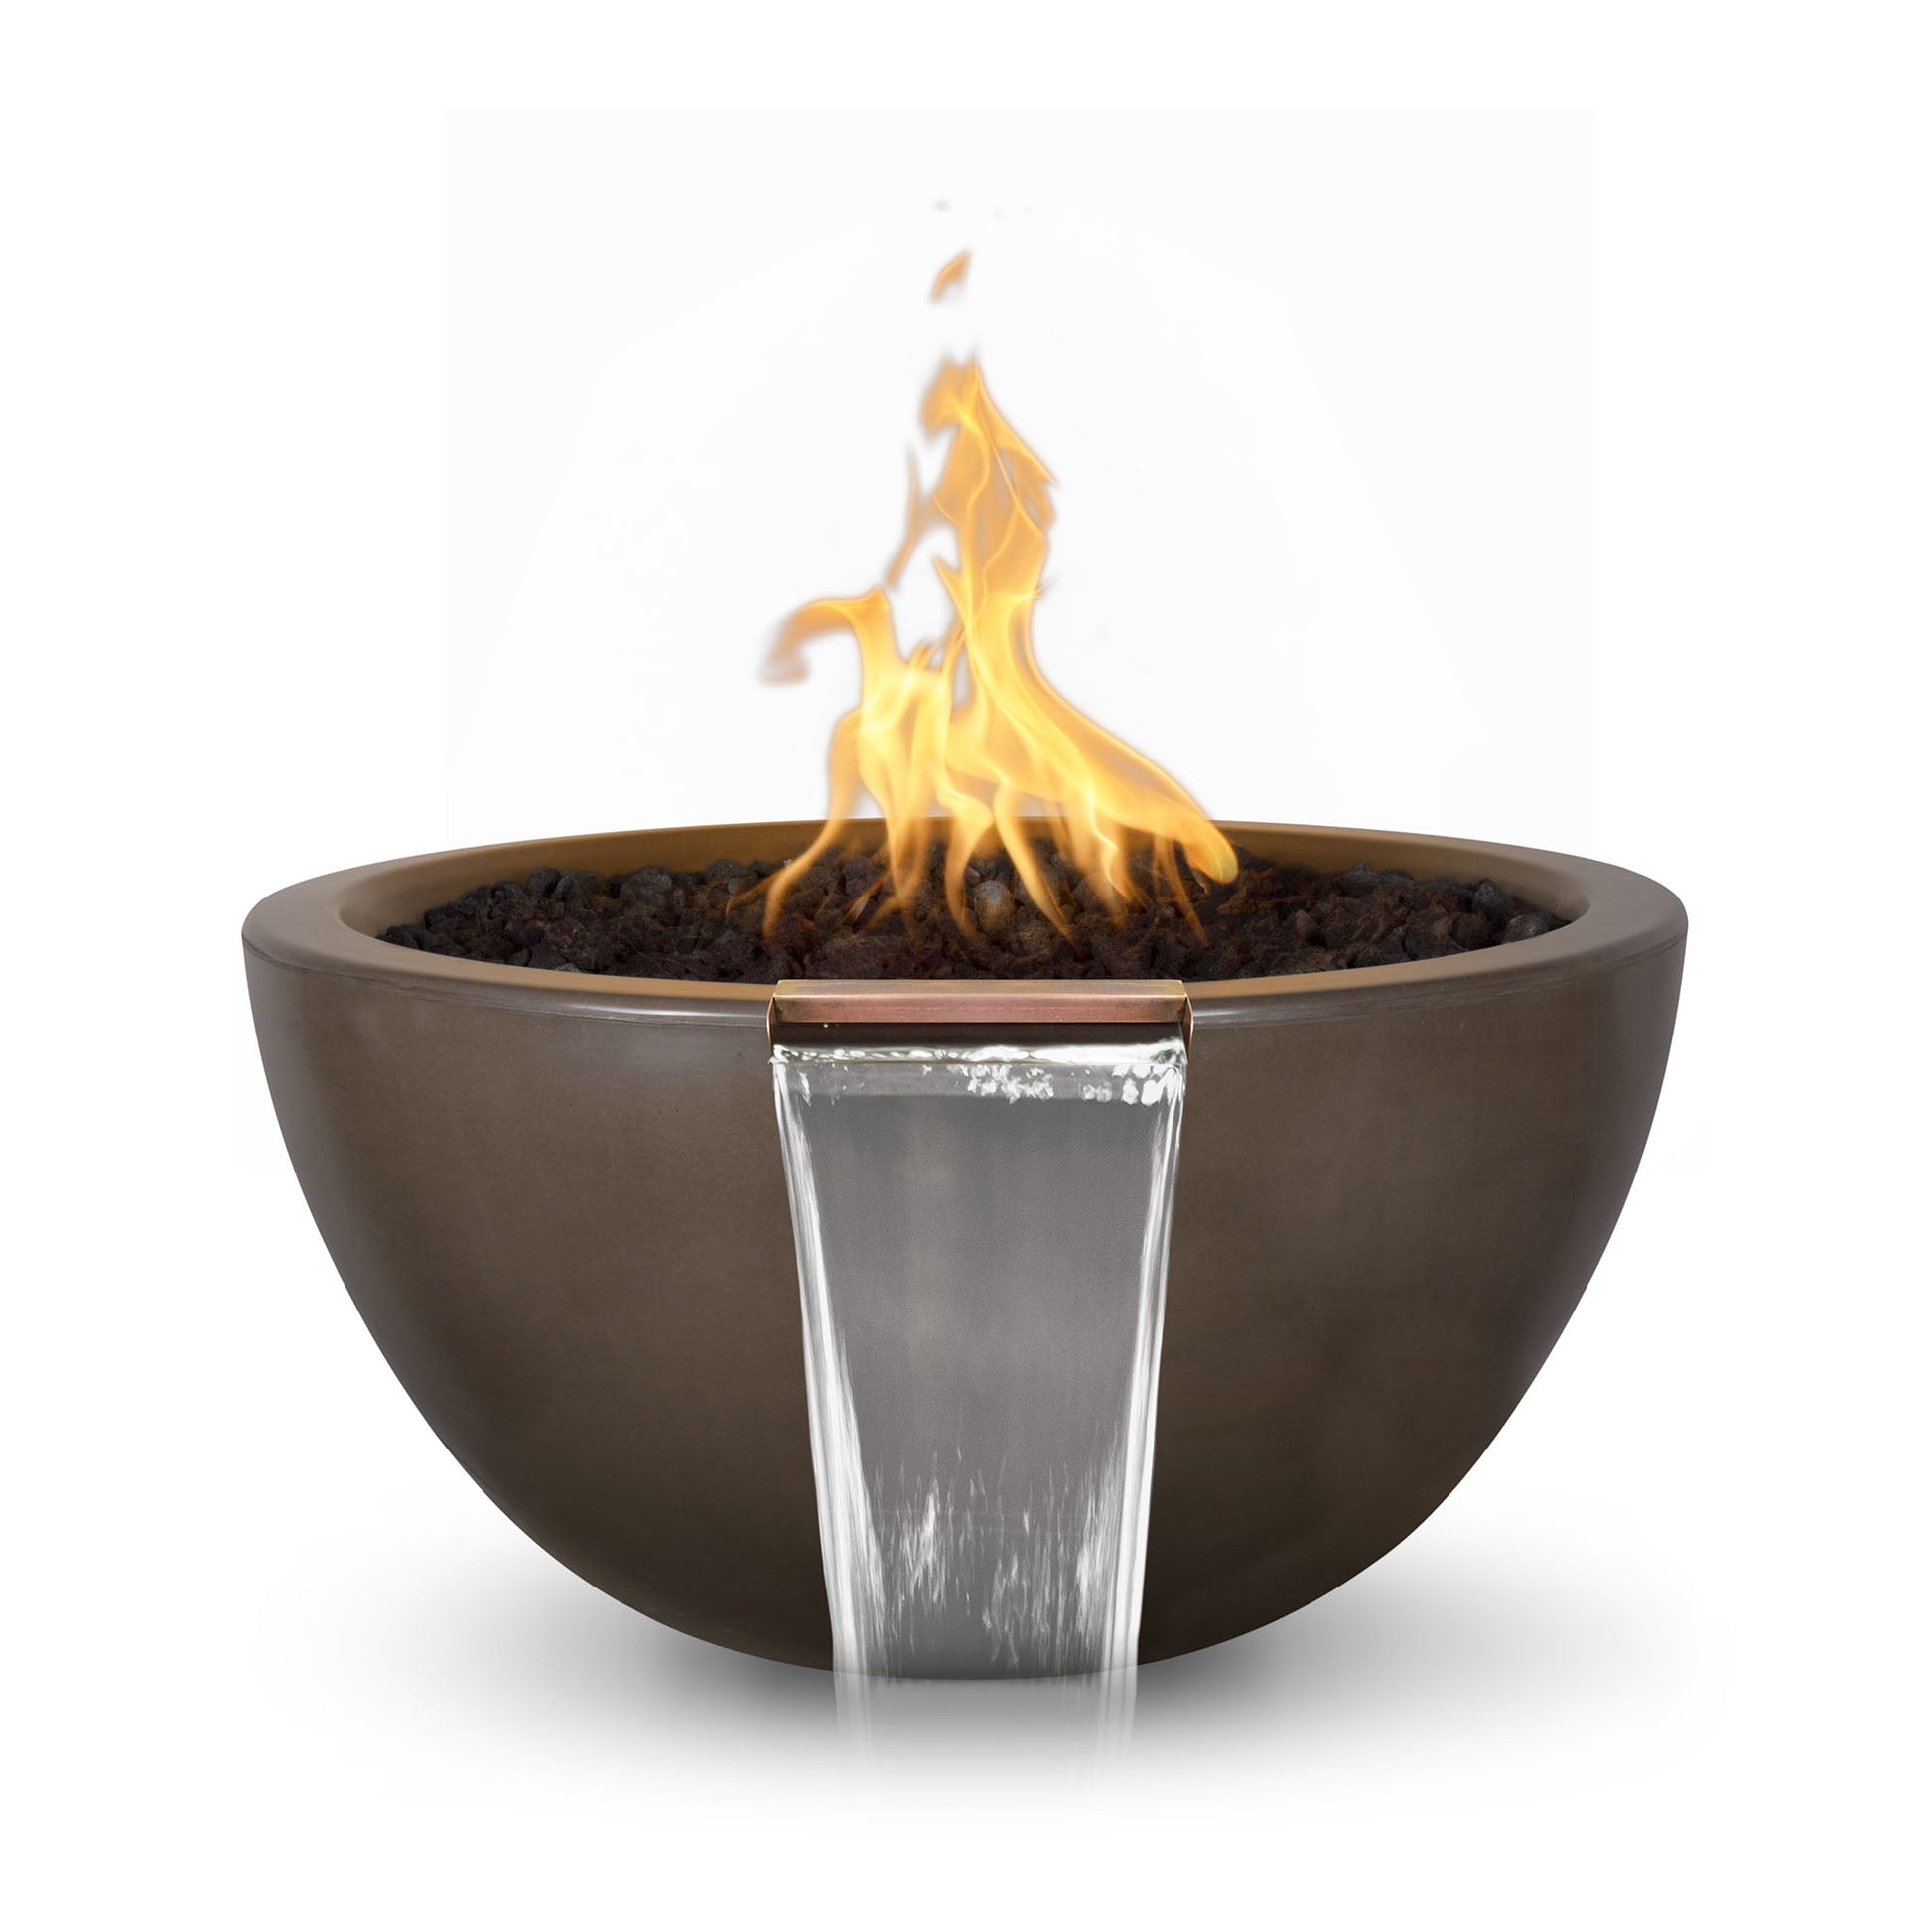 The Outdoor Plus Round Luna 30" Chocolate GFRC Concrete Natural Gas Fire & Water Bowl with Match Lit with Flame Sense Ignition